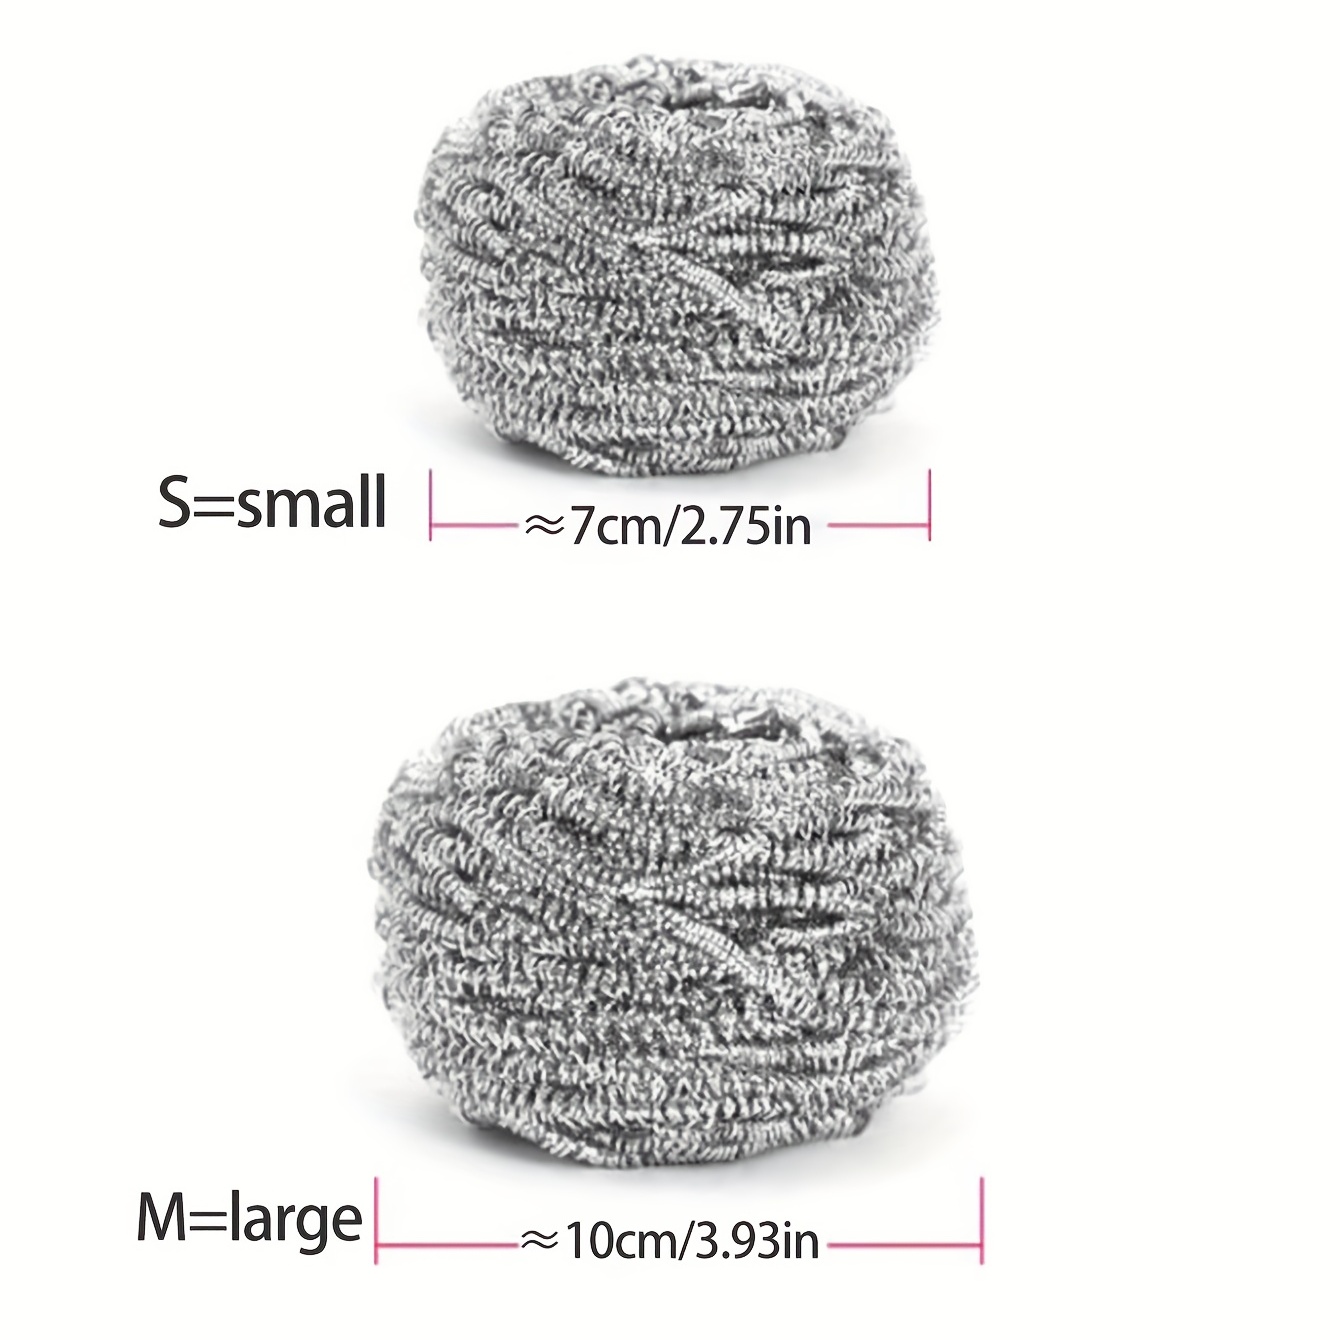 6 Pack Stainless Steel Wool Scrubber Sponge for Removing Tough